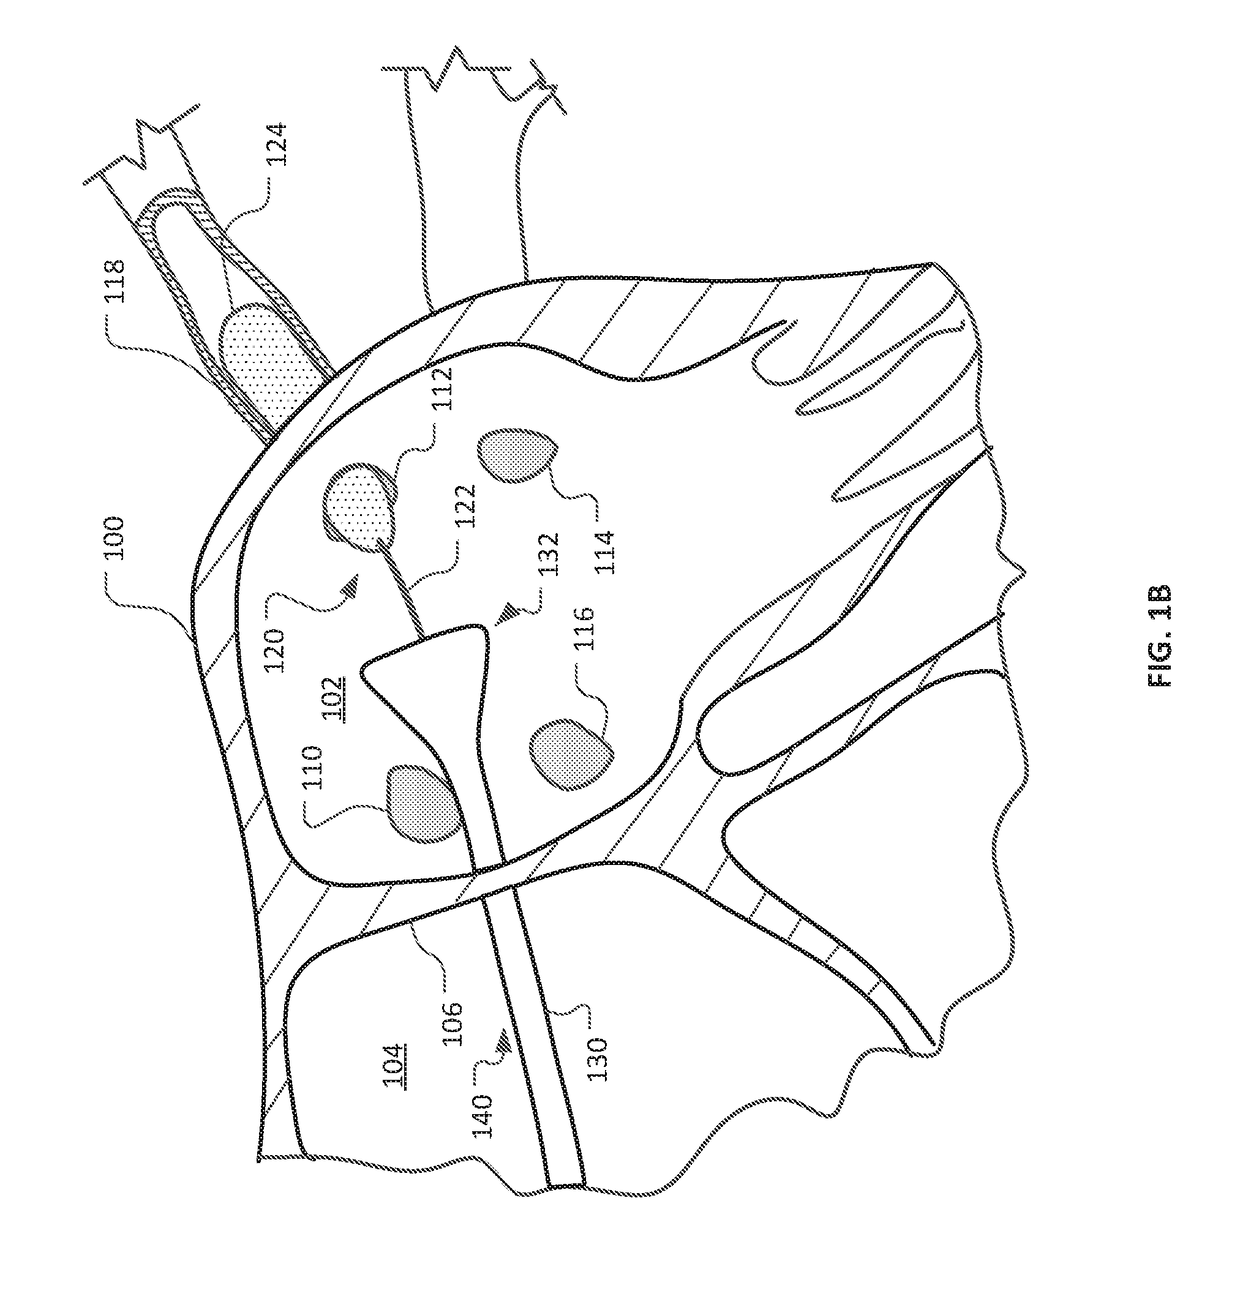 Devices and methods for ablation of tissue